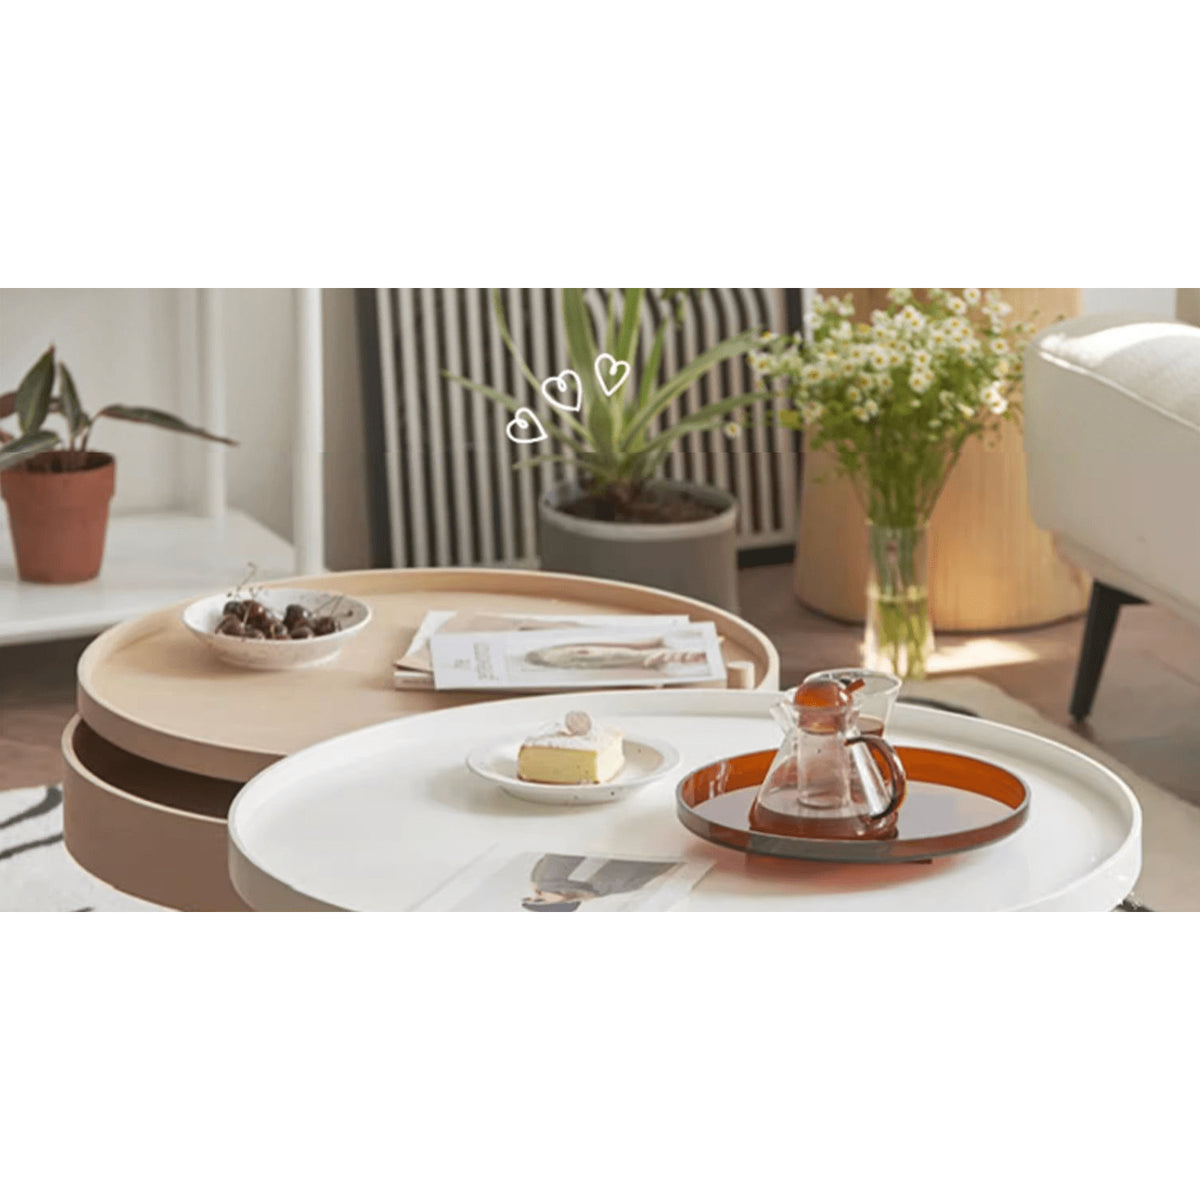 Elegant Black & Natural Wood Color Particle Board Tea Table - Stylish & Functional yw-179